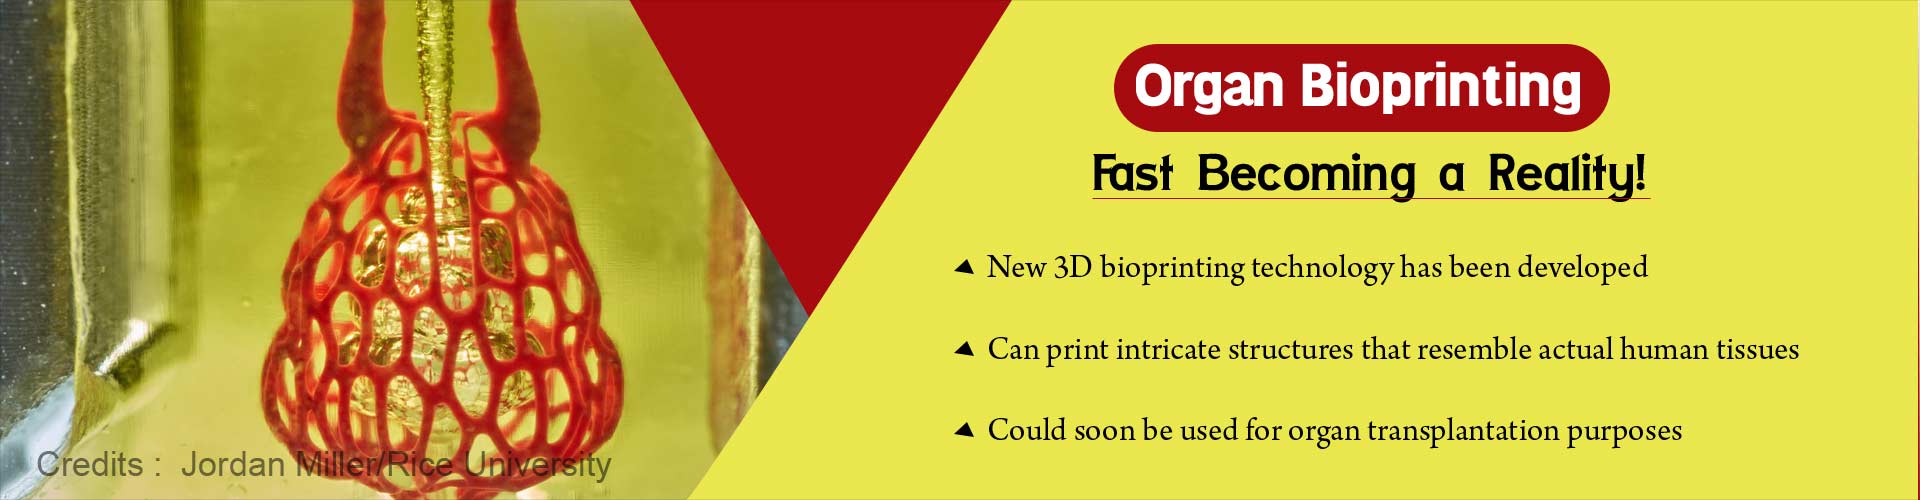 Organ bioprinting fast becoming a reality. New 3D bioprinting technology has been developed. Can print intricate structures that resemble actual human tissues. Could soon be used for organ transplantation purposes.